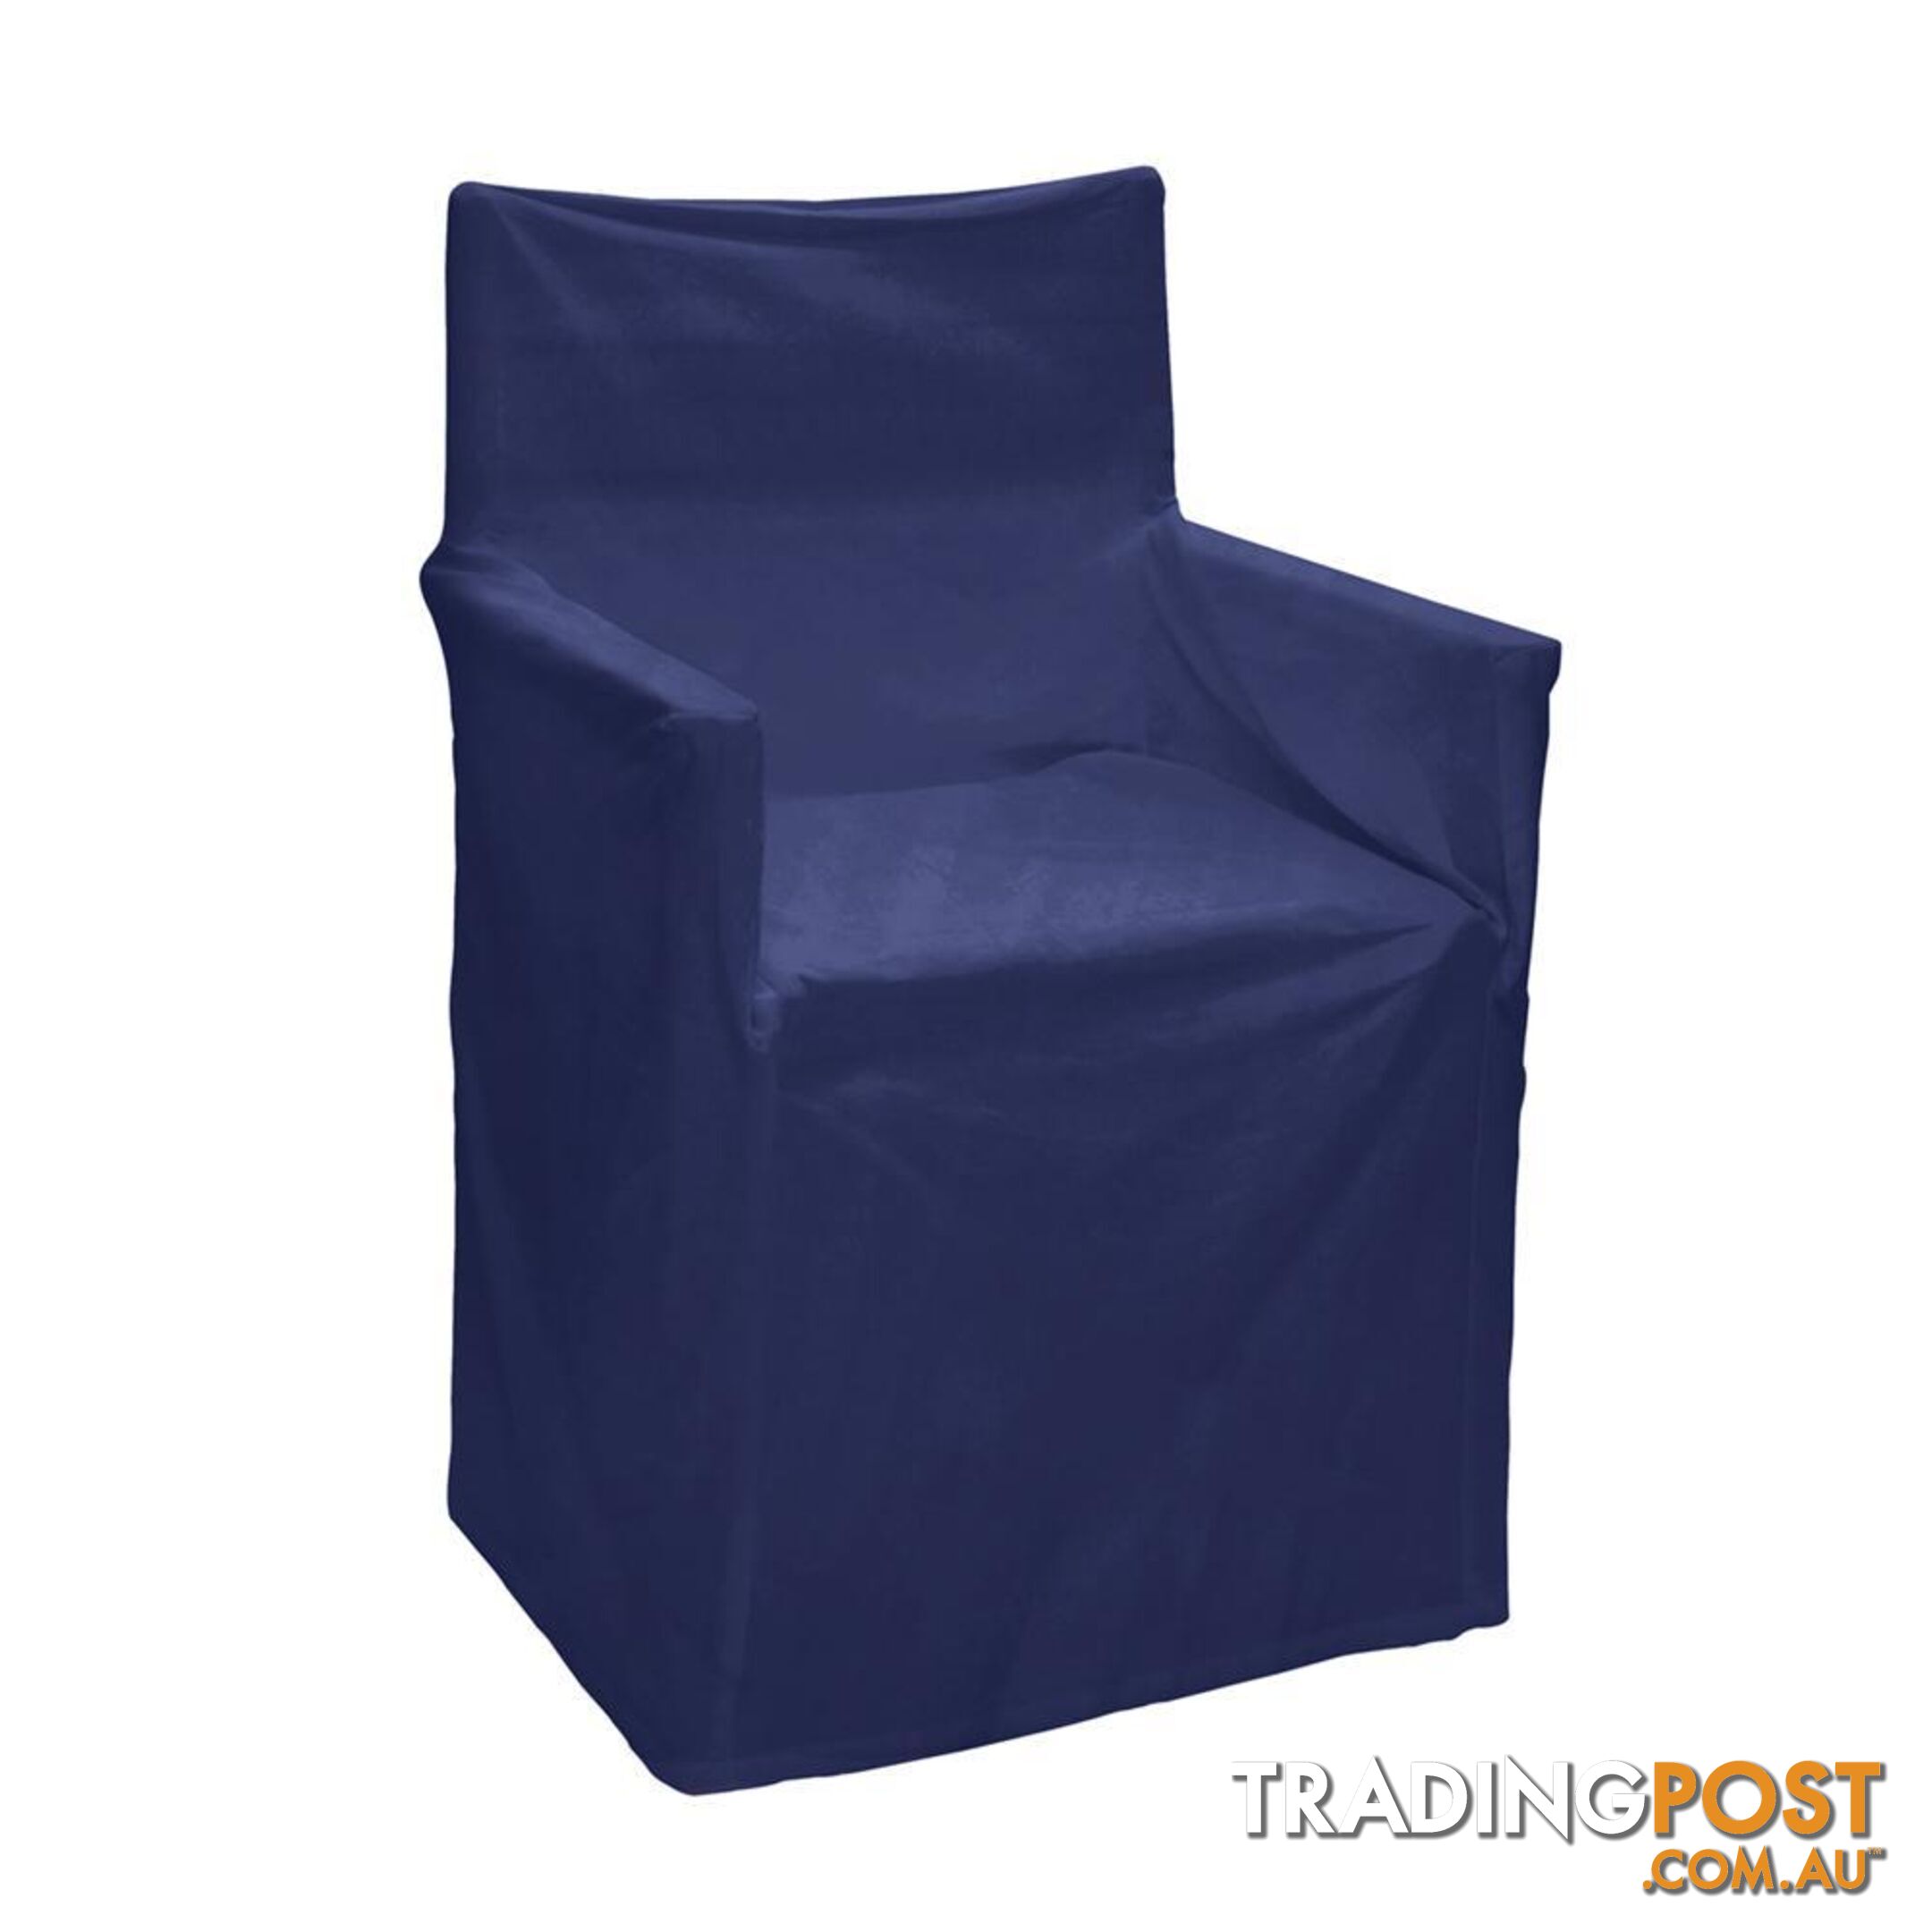 Outdoor Solid Director Chair Cover Std Blue - Unbranded - 7427046103664